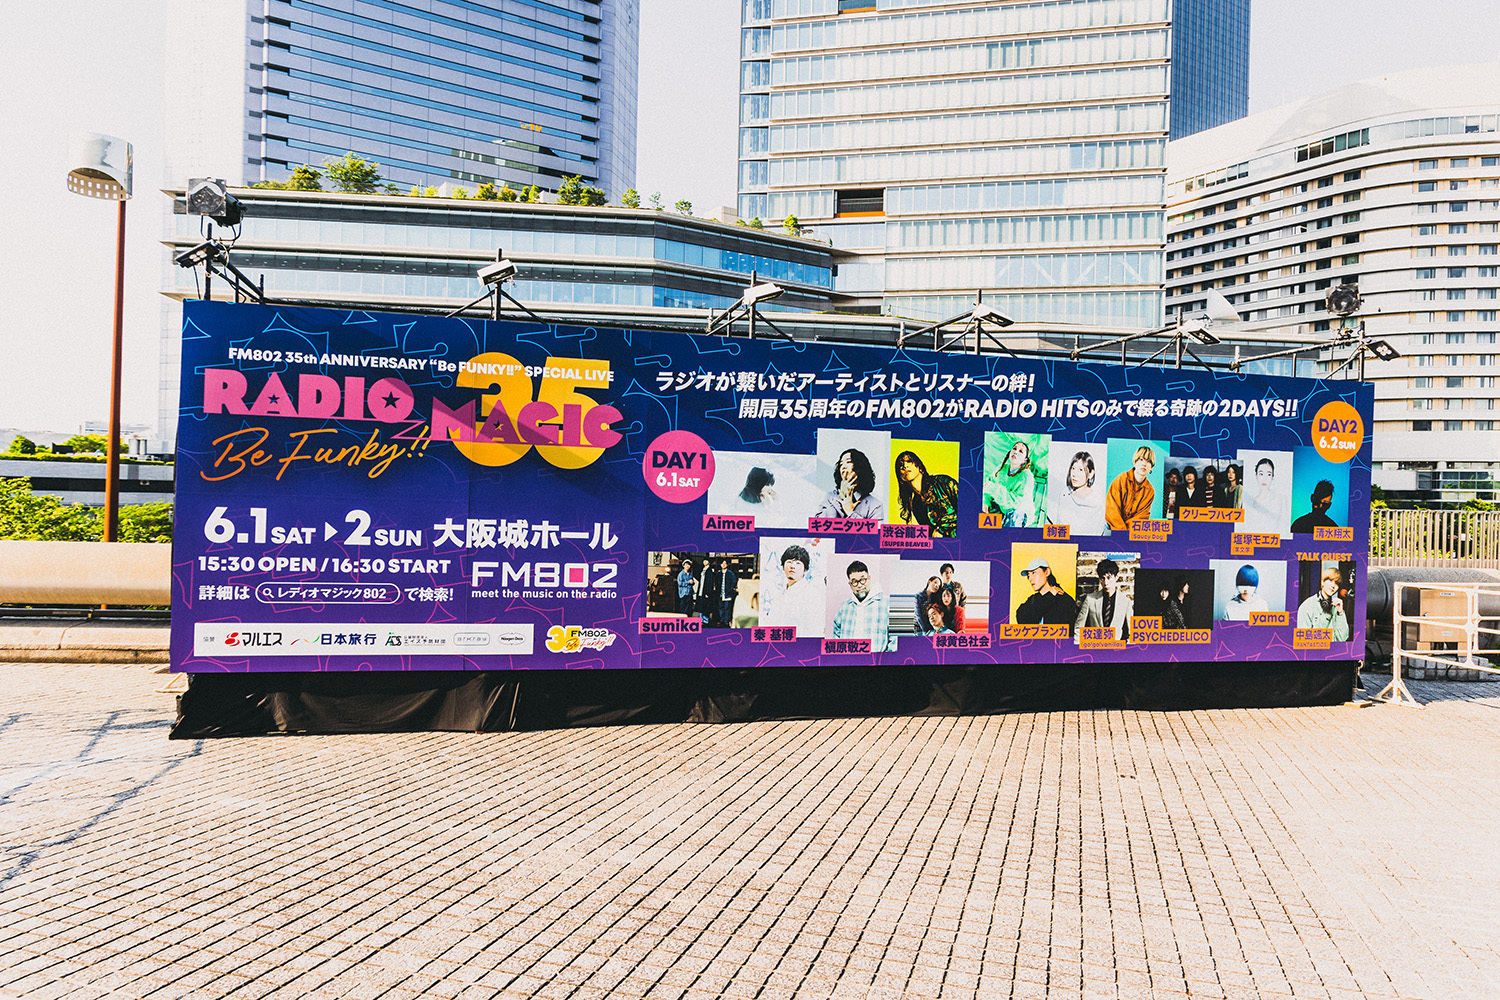 『FM802 35th ANNIVERSARY “Be FUNKY!!” SPECIAL LIVE RADIO MAGIC』